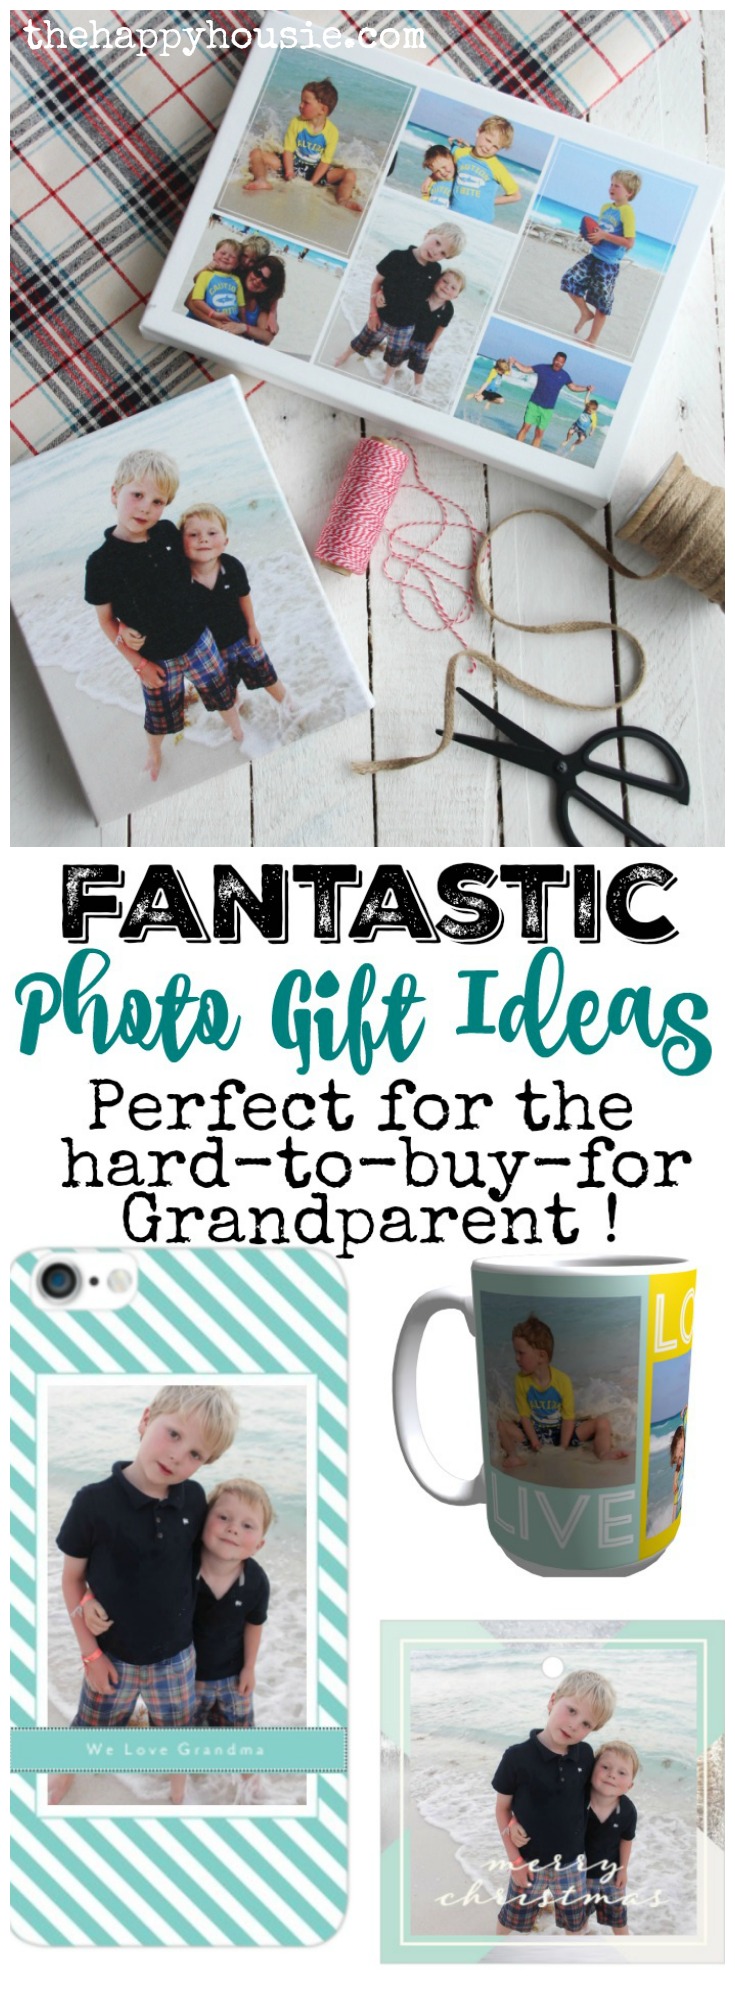 Fantastic Photo Gift Ideas perfect for the hard to buy for grandparent (or Mom or Dad!)